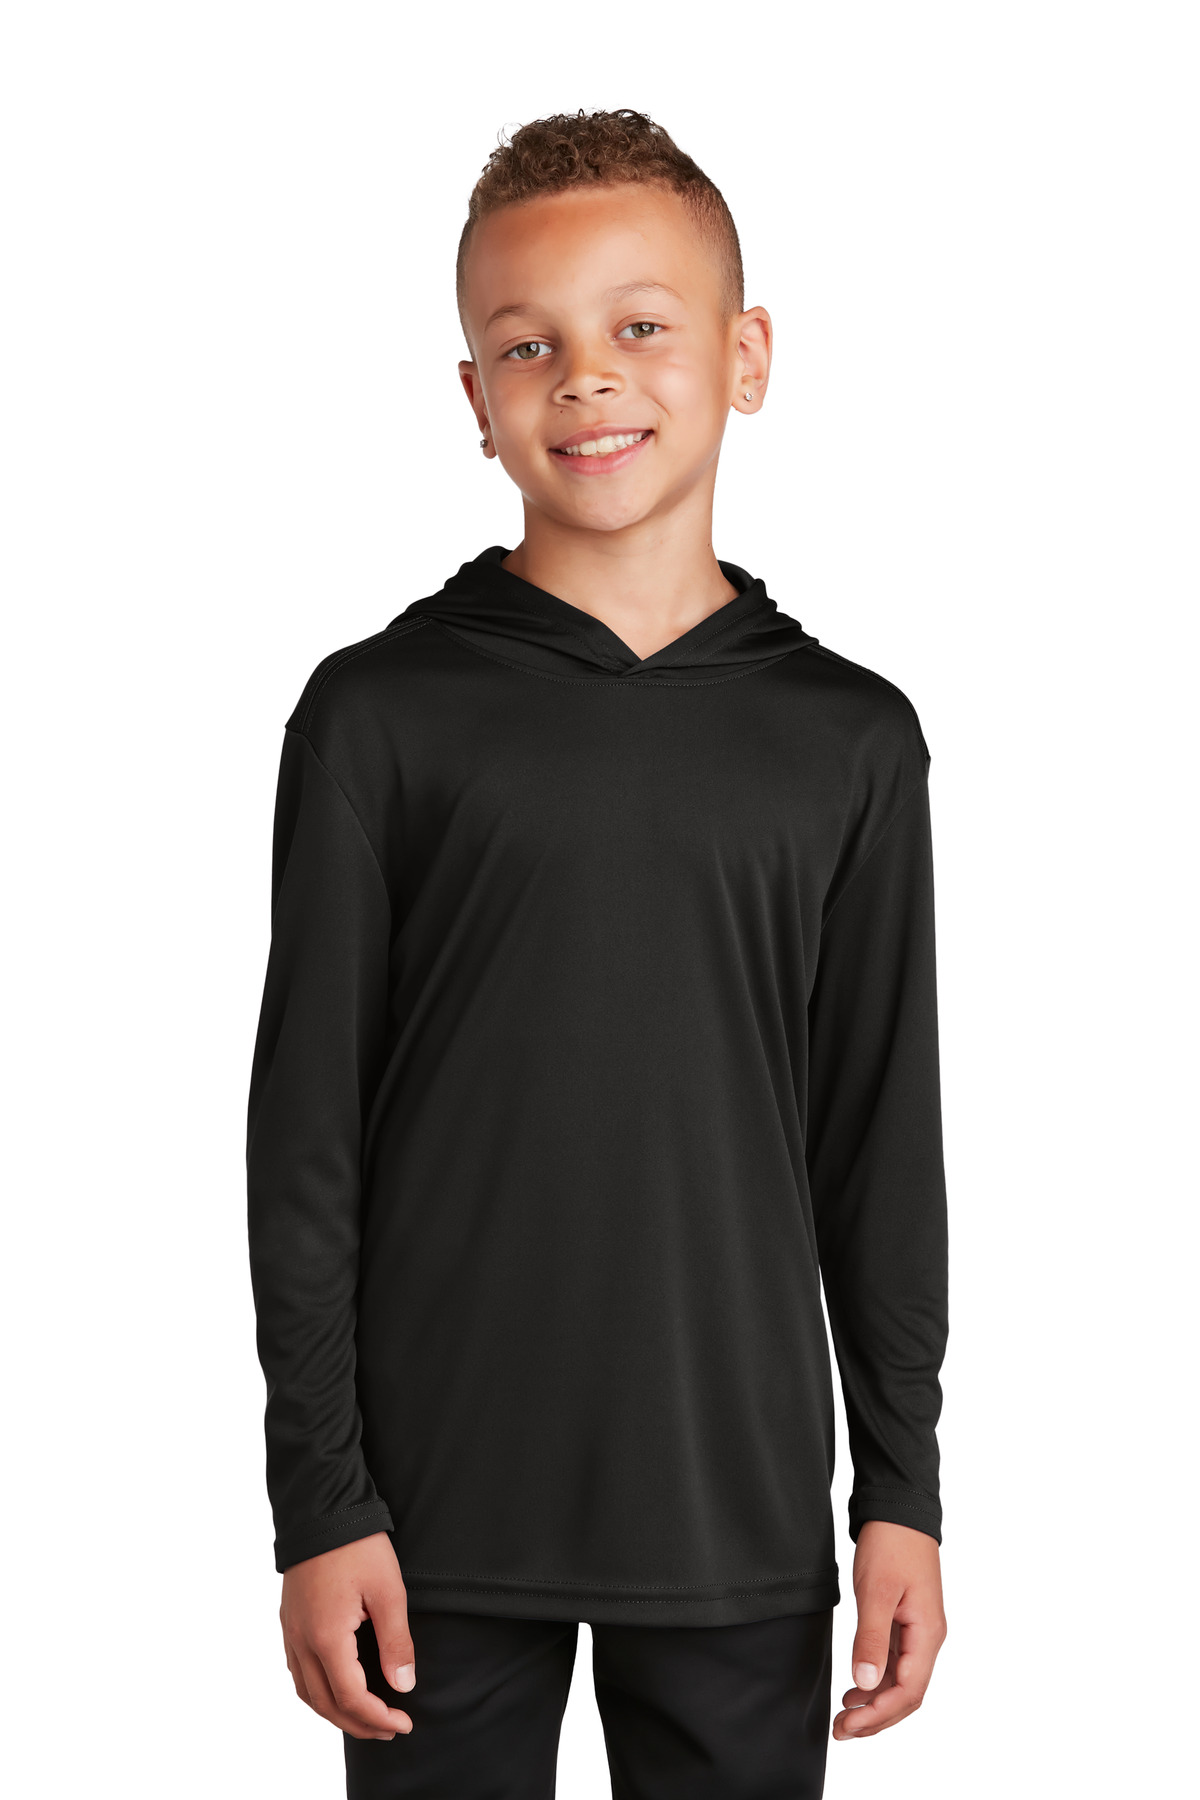 Sport-Tek Hospitality Youth T-Shirts ® Youth PosiCharge ® Competitor Hooded Pullover.-Sport-Tek